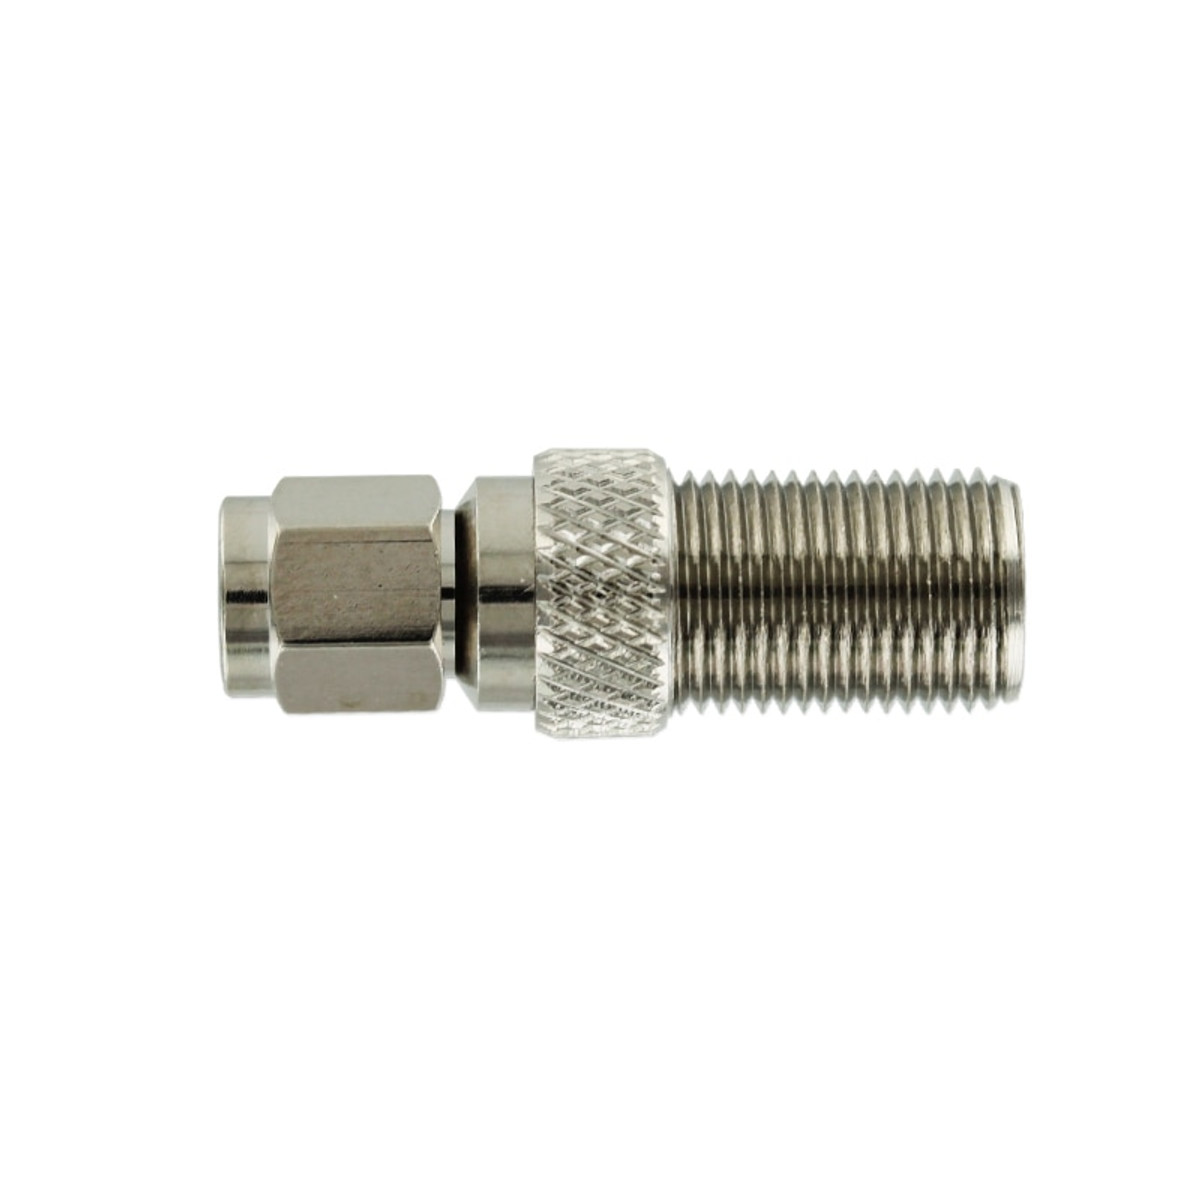 weBoost (Wilson) 971165 F-Female to SMA-Male Connector